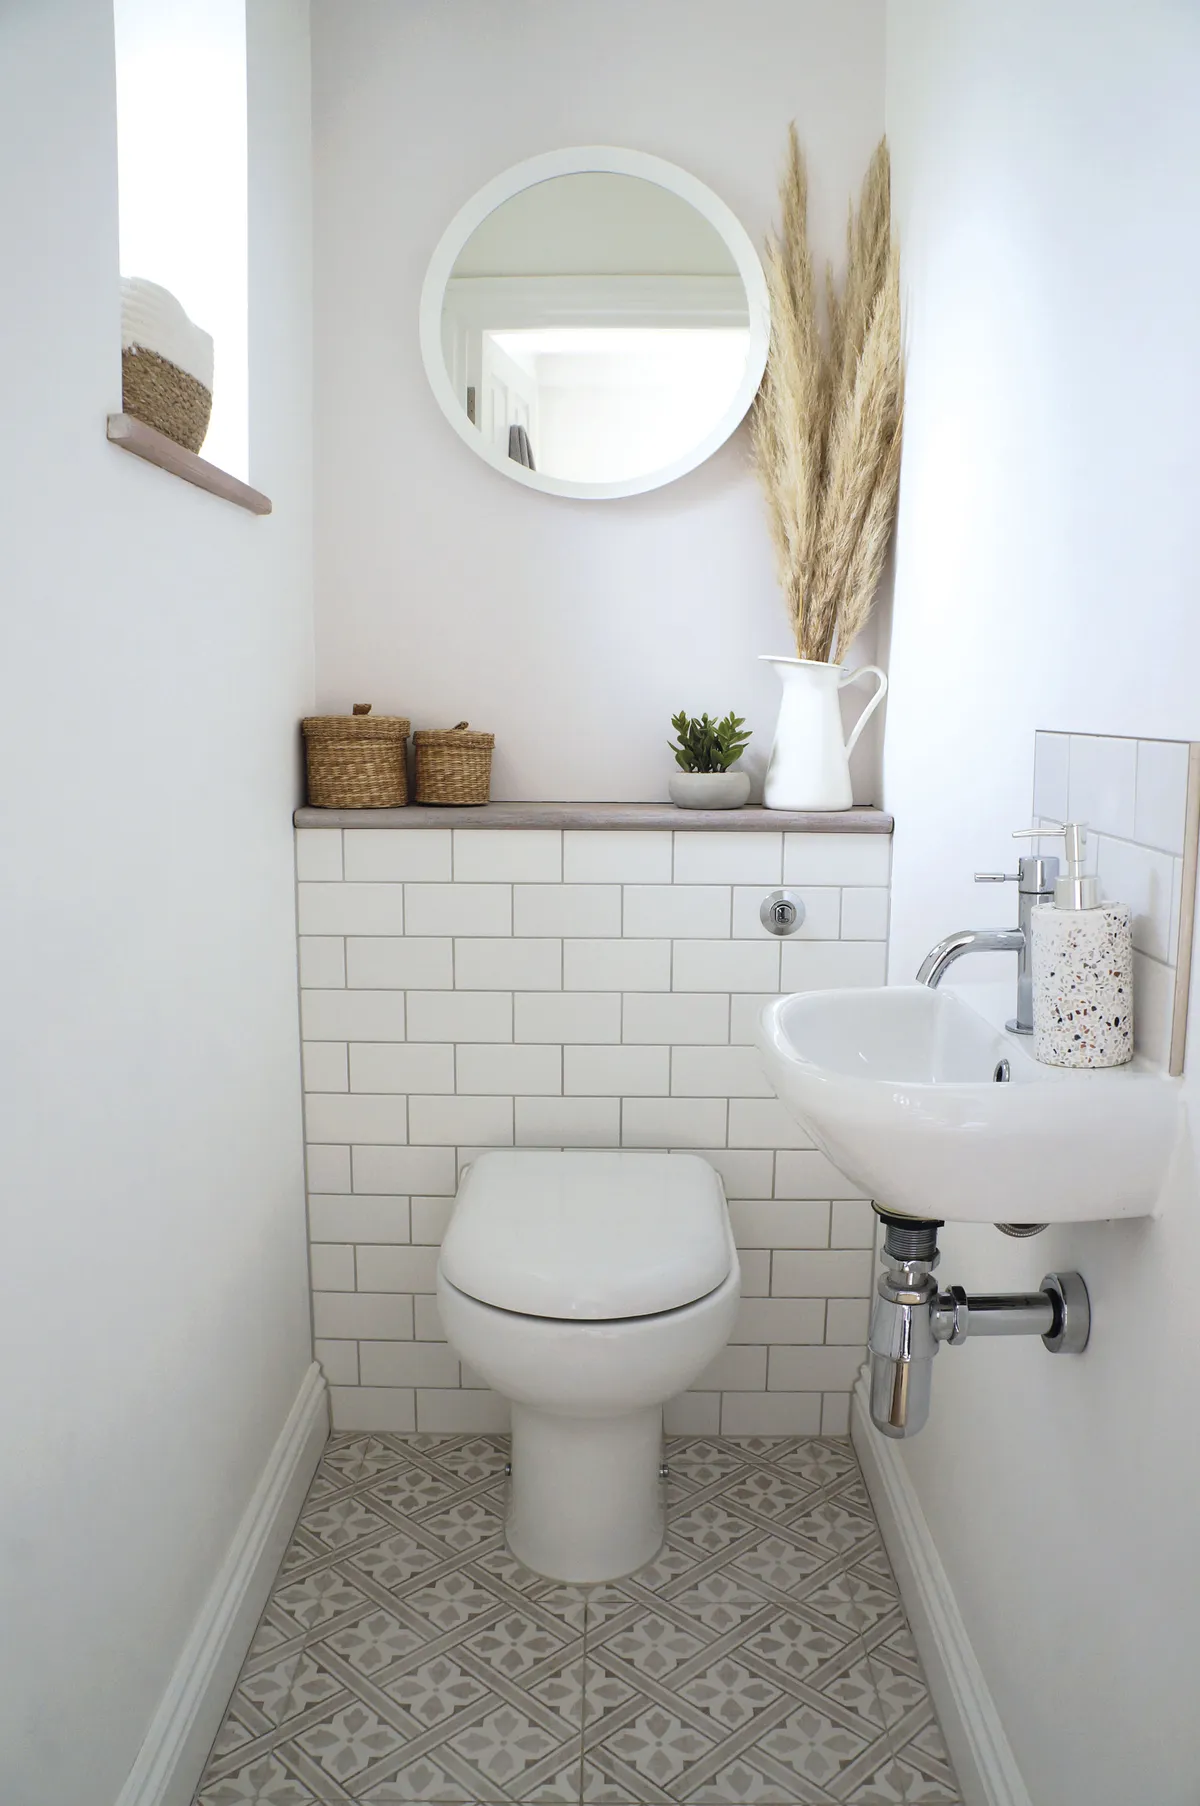 ‘This part of the house was originally a cold and damp outhouse,’ Jade says. ‘We chose a hidden cistern so I could display items on the shelf and added a wall-hung sink. The patterned floor tiles are part of the Mr Jones range from Laura Ashley.’